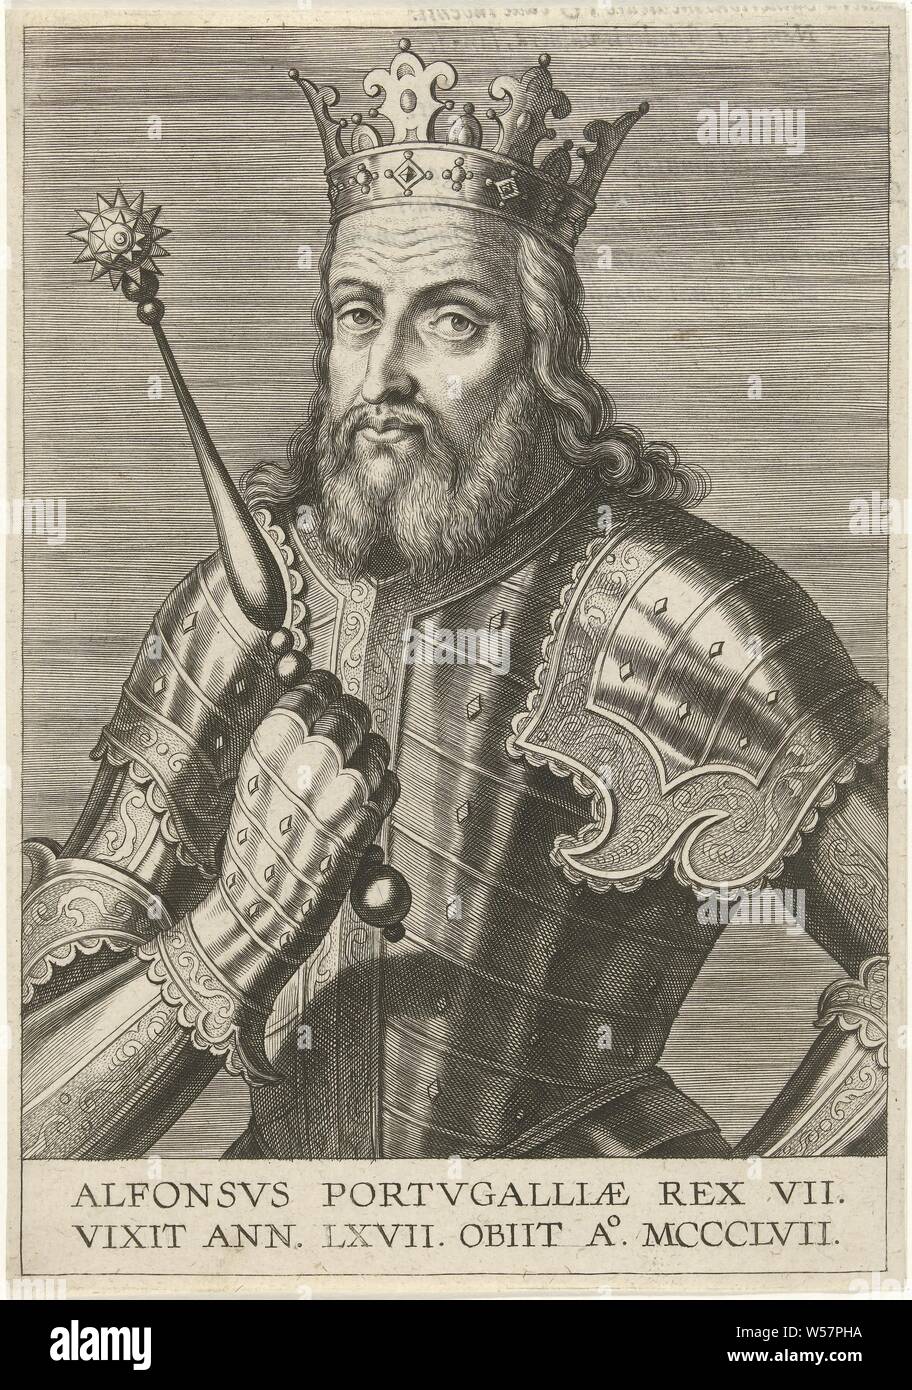 Portrait of King Alfonso IV of Portugal Kings and princes of Portugal (series title), insignia and symbols of sovereignty (crown, diadem, scepter, orb, seal, standard, cloak, pectoral), Portugal, Alfons IV (king of Portugal), Cornelis Galle (I), 1621, paper, engraving, h 190 mm × w 132 mm Stock Photo